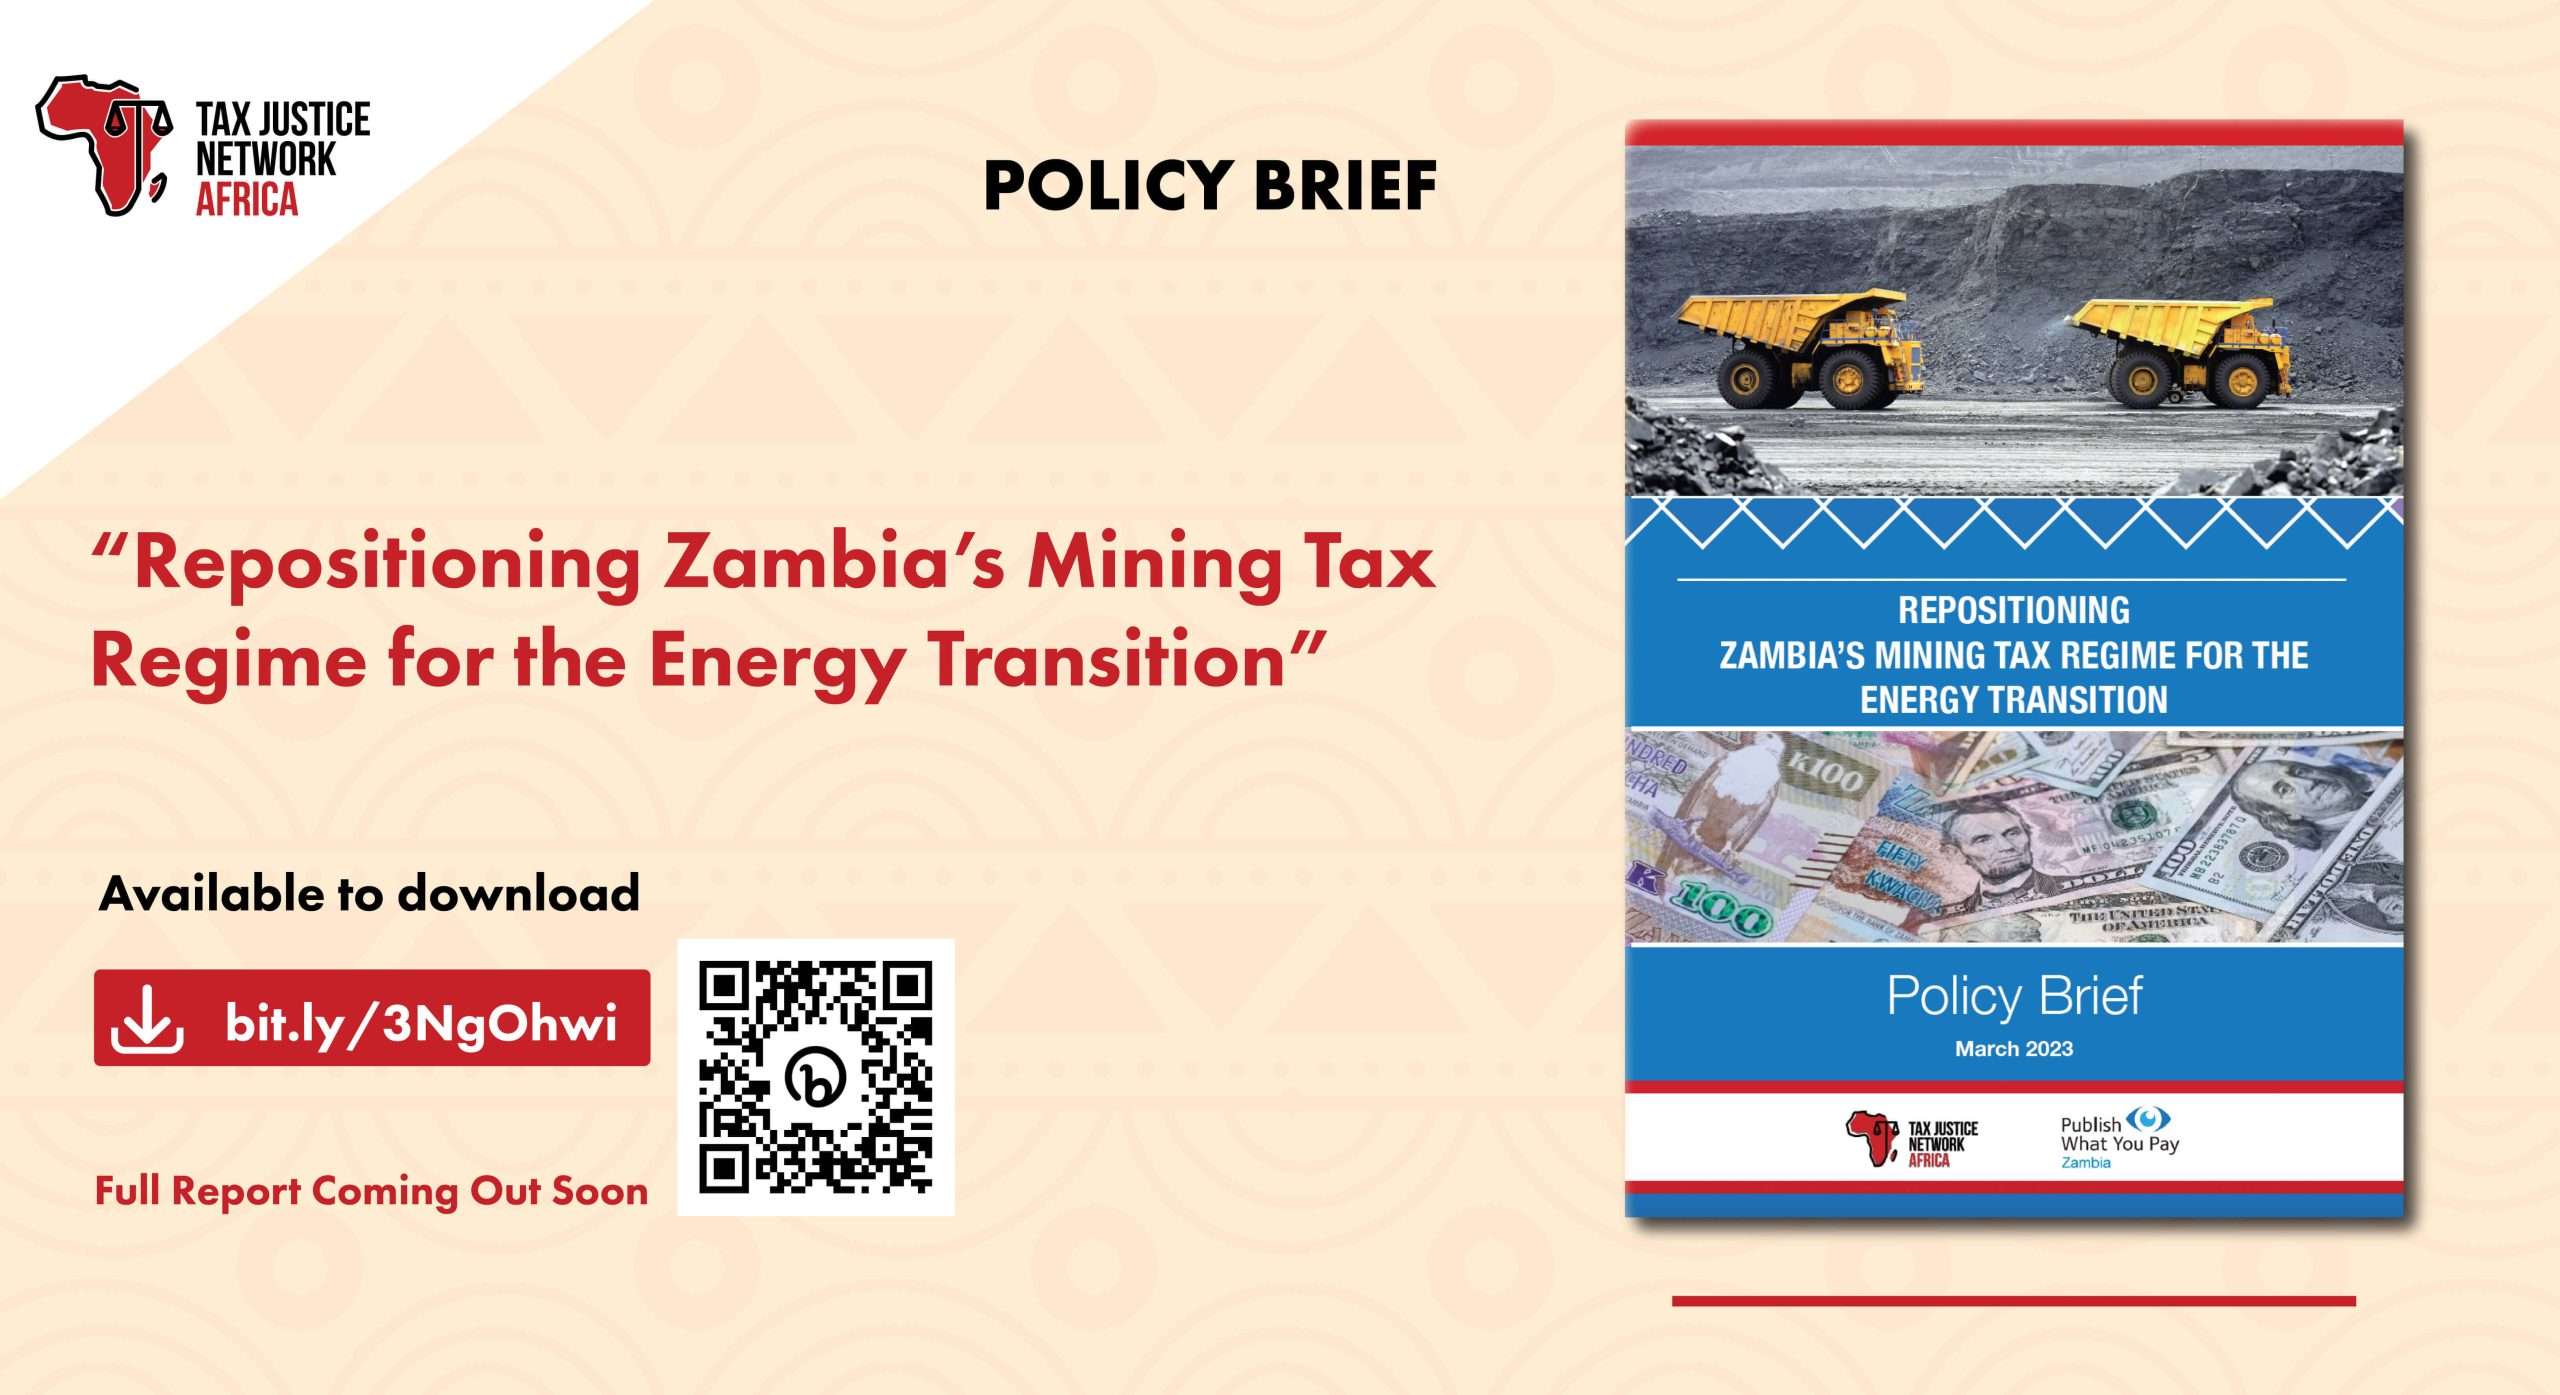 Report: Repositioning Zambia’s Mining Tax Regime for The Energy Transition